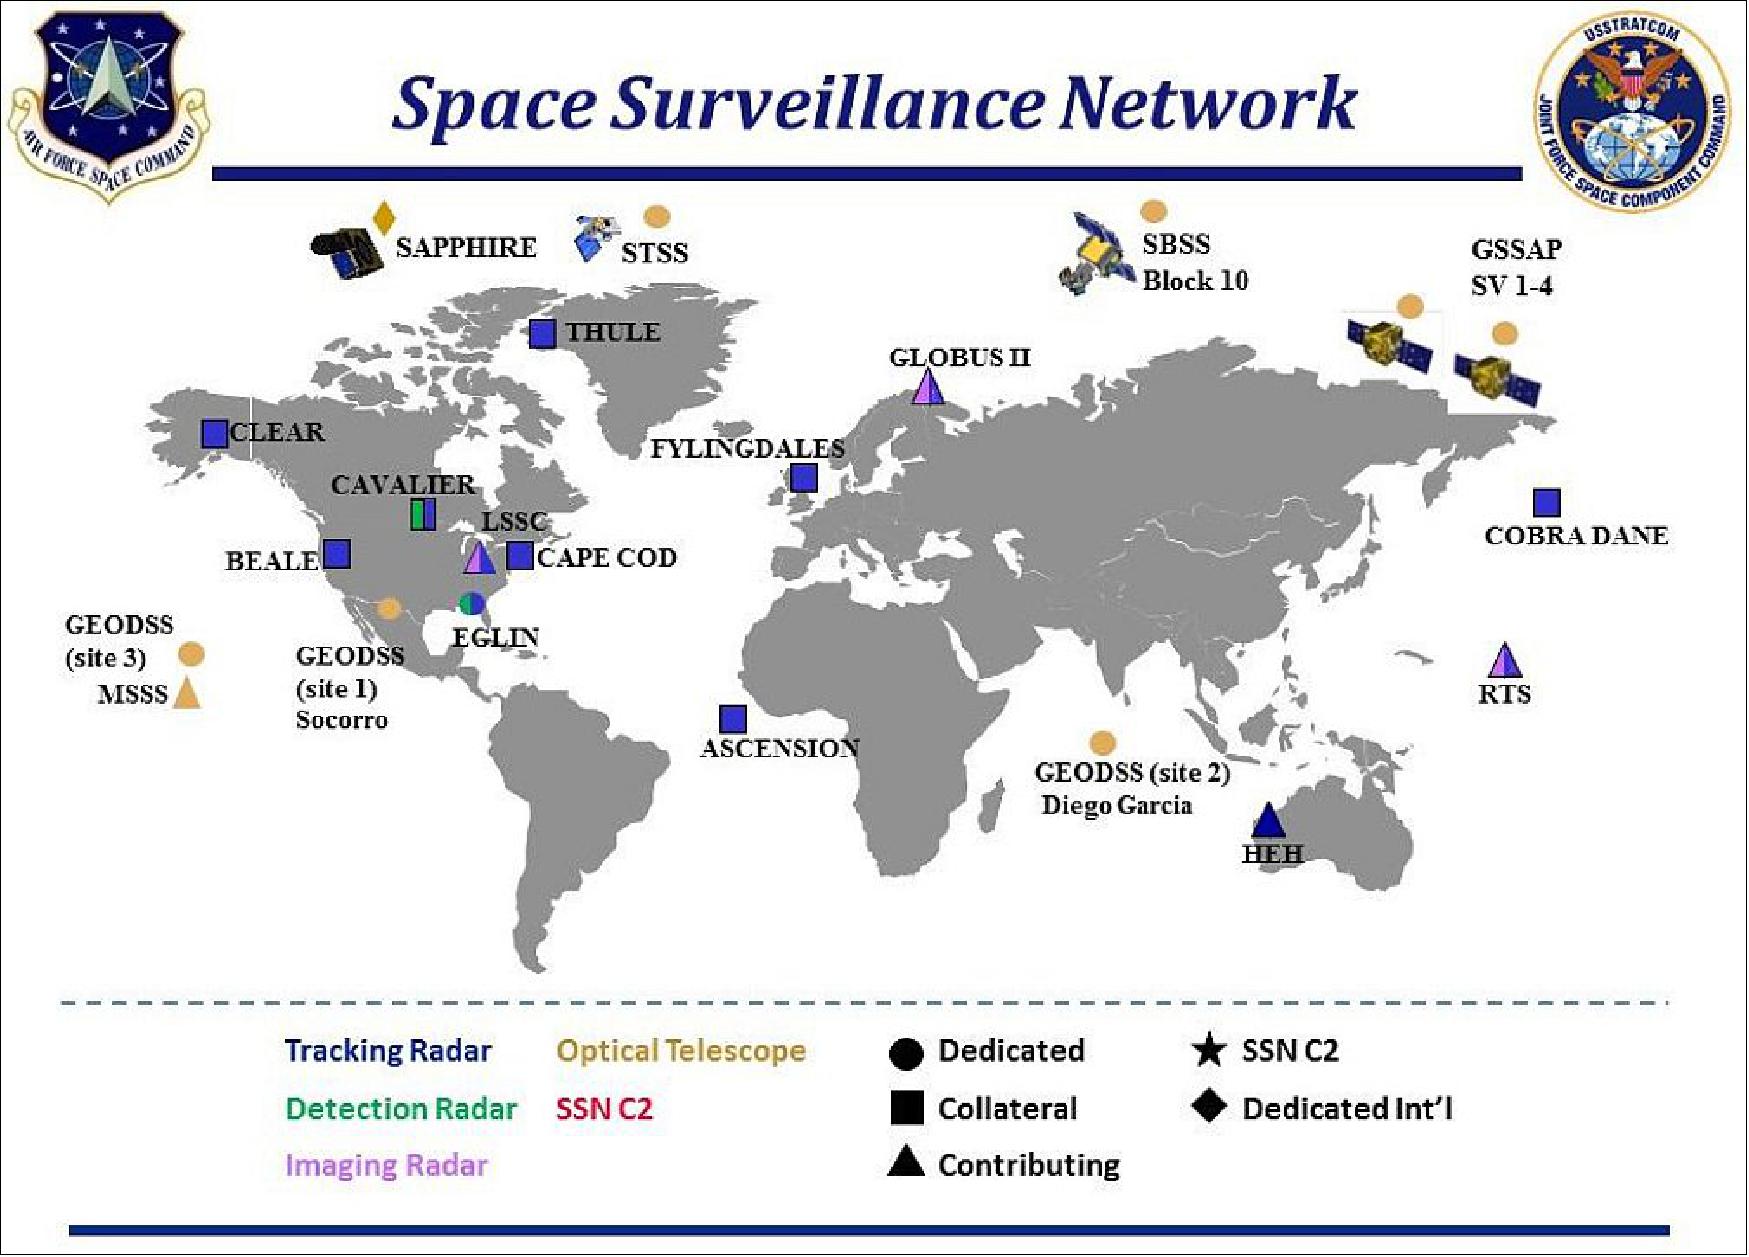 Figure 3: Overview of the global SSN (Space Surveillance Network) ground-based sites (image credit: USSF)